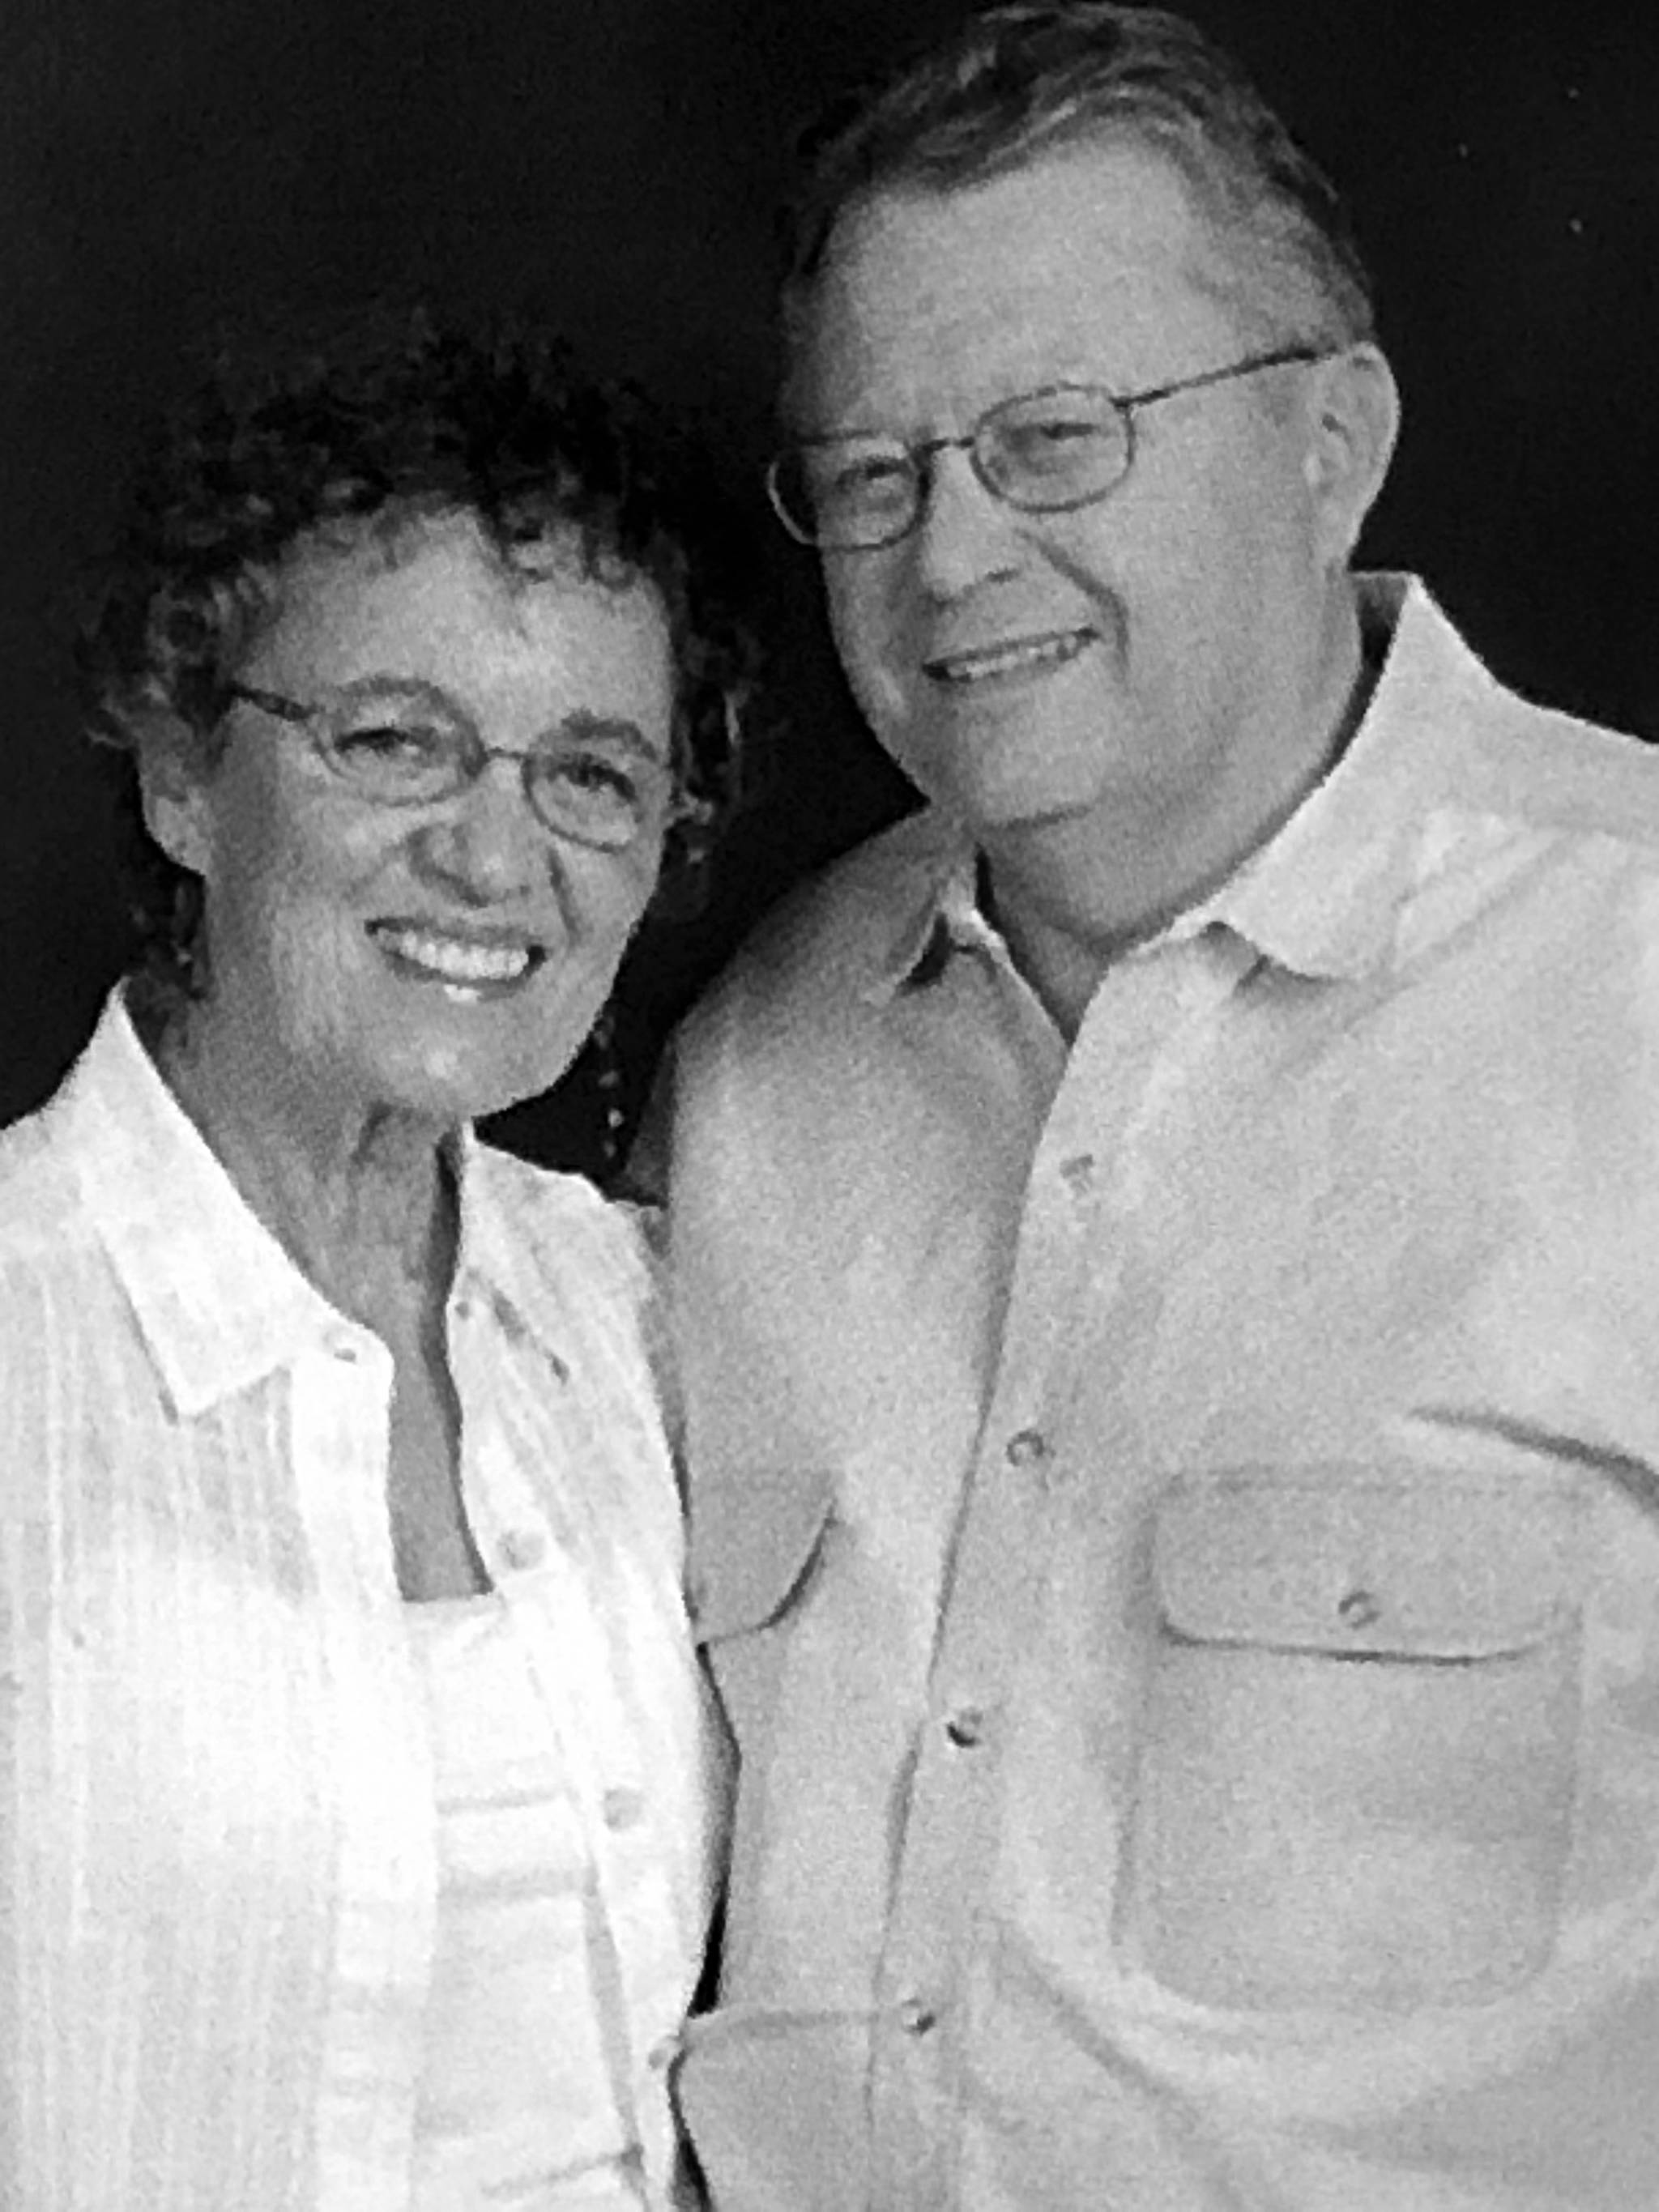 Tonette Snyder passed away earlier this year in July. She and Gary met while attending the University of Washington. Photo courtesy of Greg Asimakoupoulos